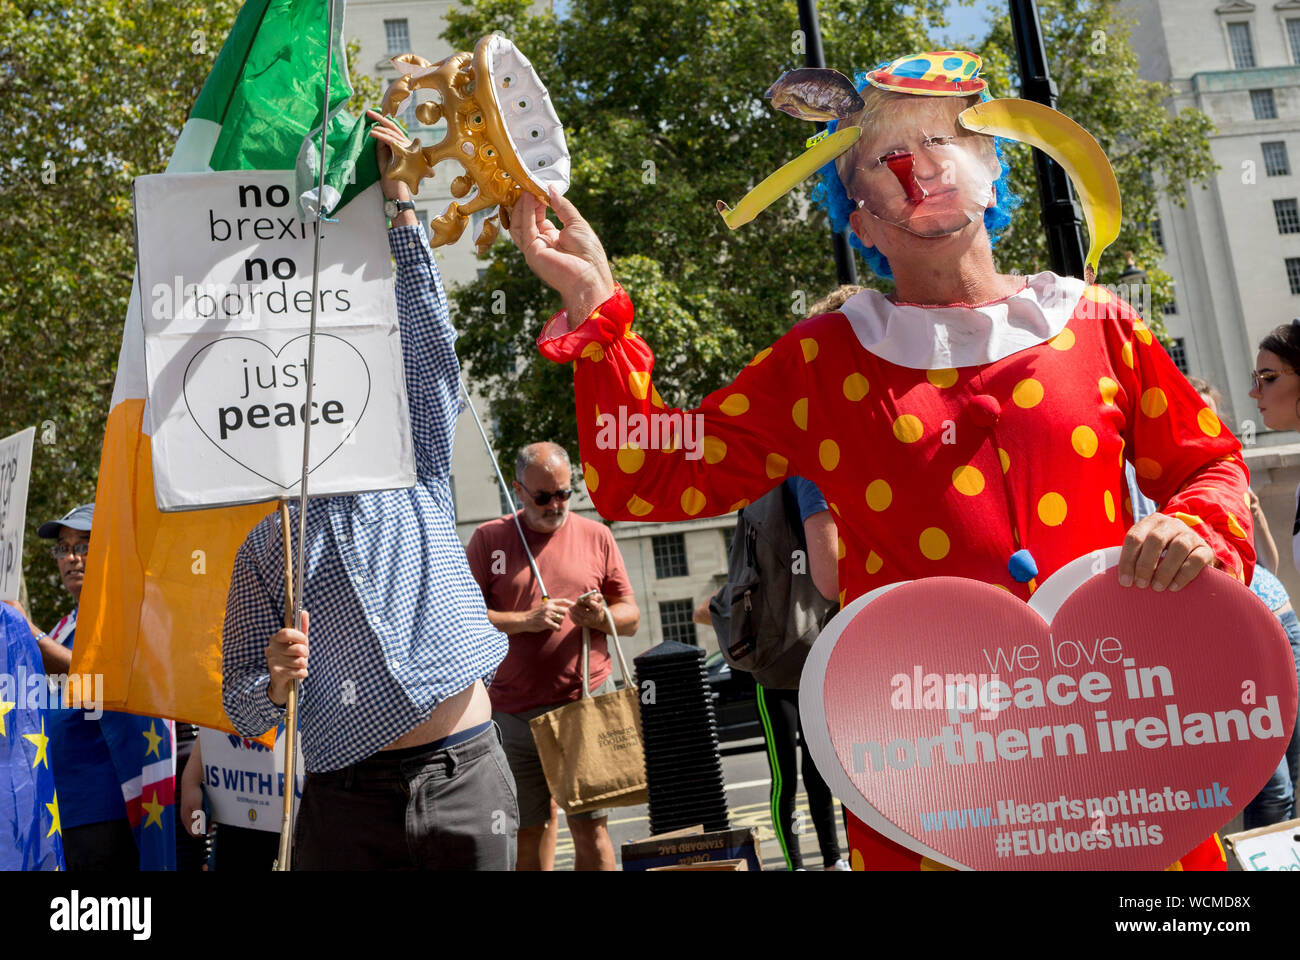 On the day that British Prime Minister Boris Johnson sought to have Parliament suspended by Queen Elizabeth, days after MPs return to work in September - and only a few weeks before the Brexit deadline, pro-EU Remain voters protest outside the Cabinet Office where daily Brexit contingency planning meetings take place, on 28th August 2019, in Whitehall, Westminster, London, England. Stock Photo